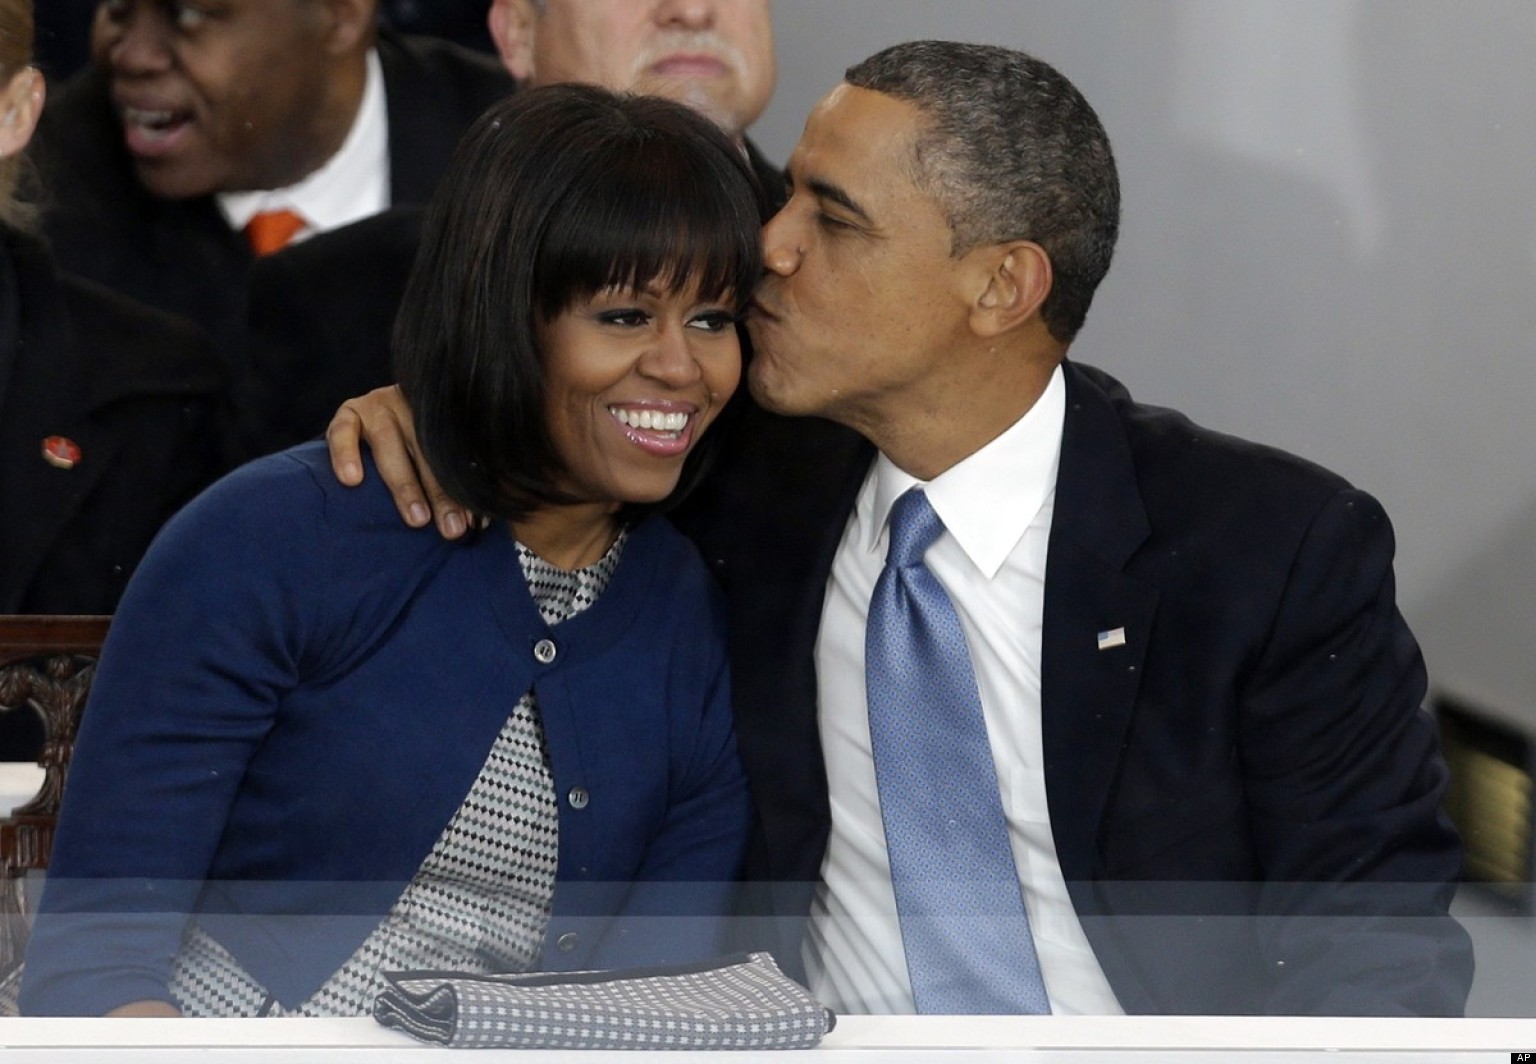 Obama Kiss: The Best Smooches From The Presidential Inauguration (PHOTOS) | HuffPost1536 x 1064